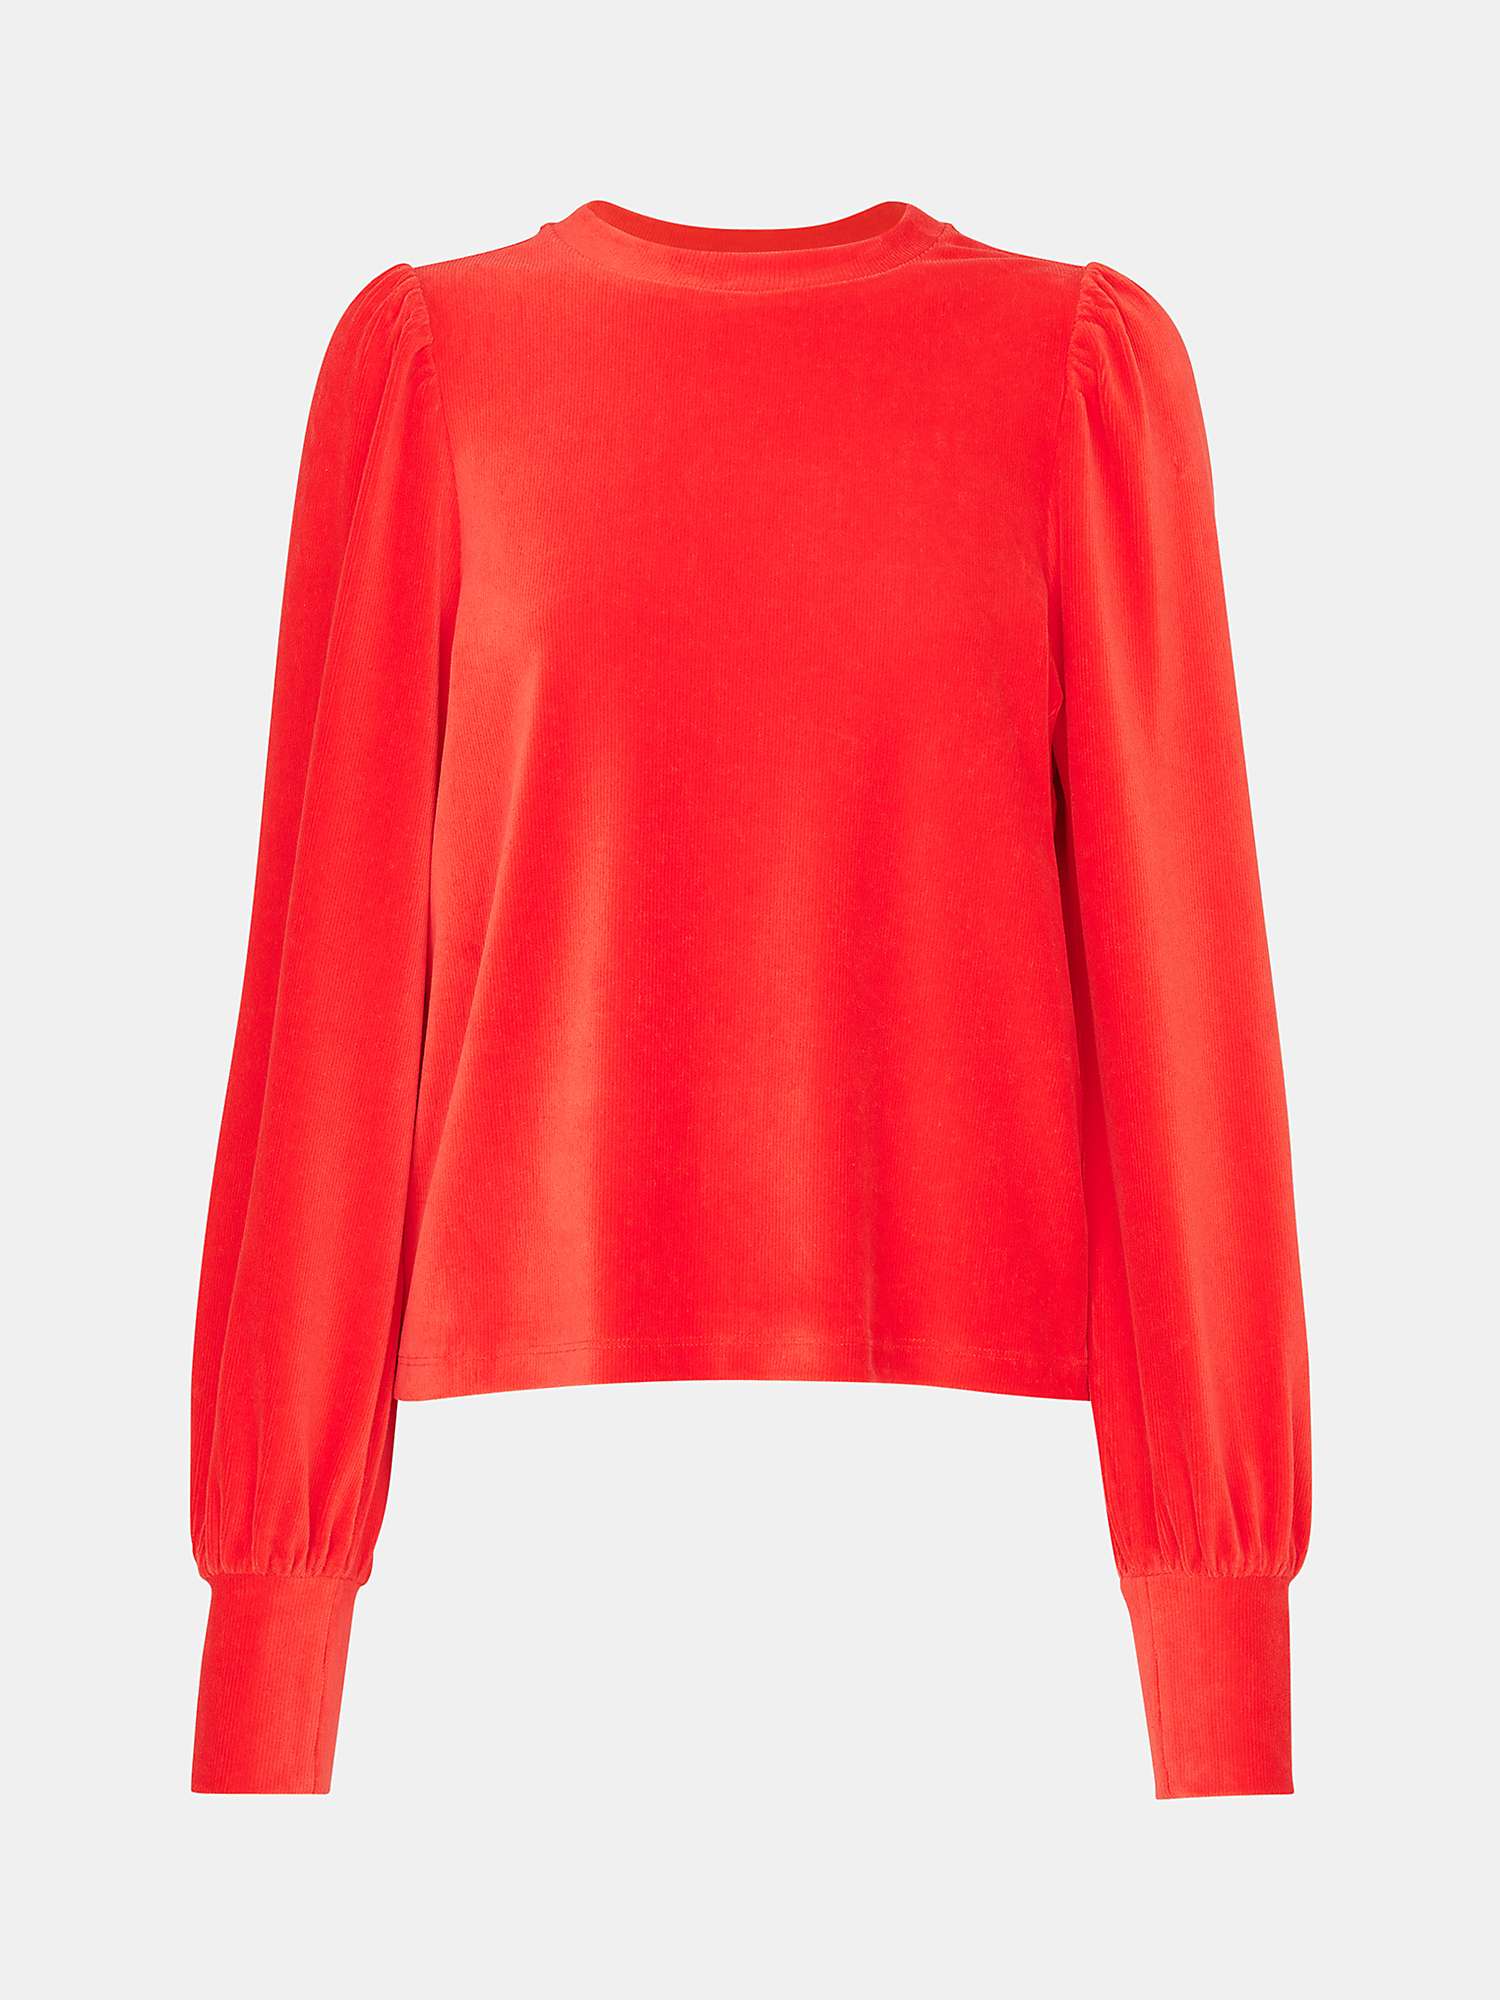 Buy Whistles Puff Sleeve Cord Top, Red Online at johnlewis.com